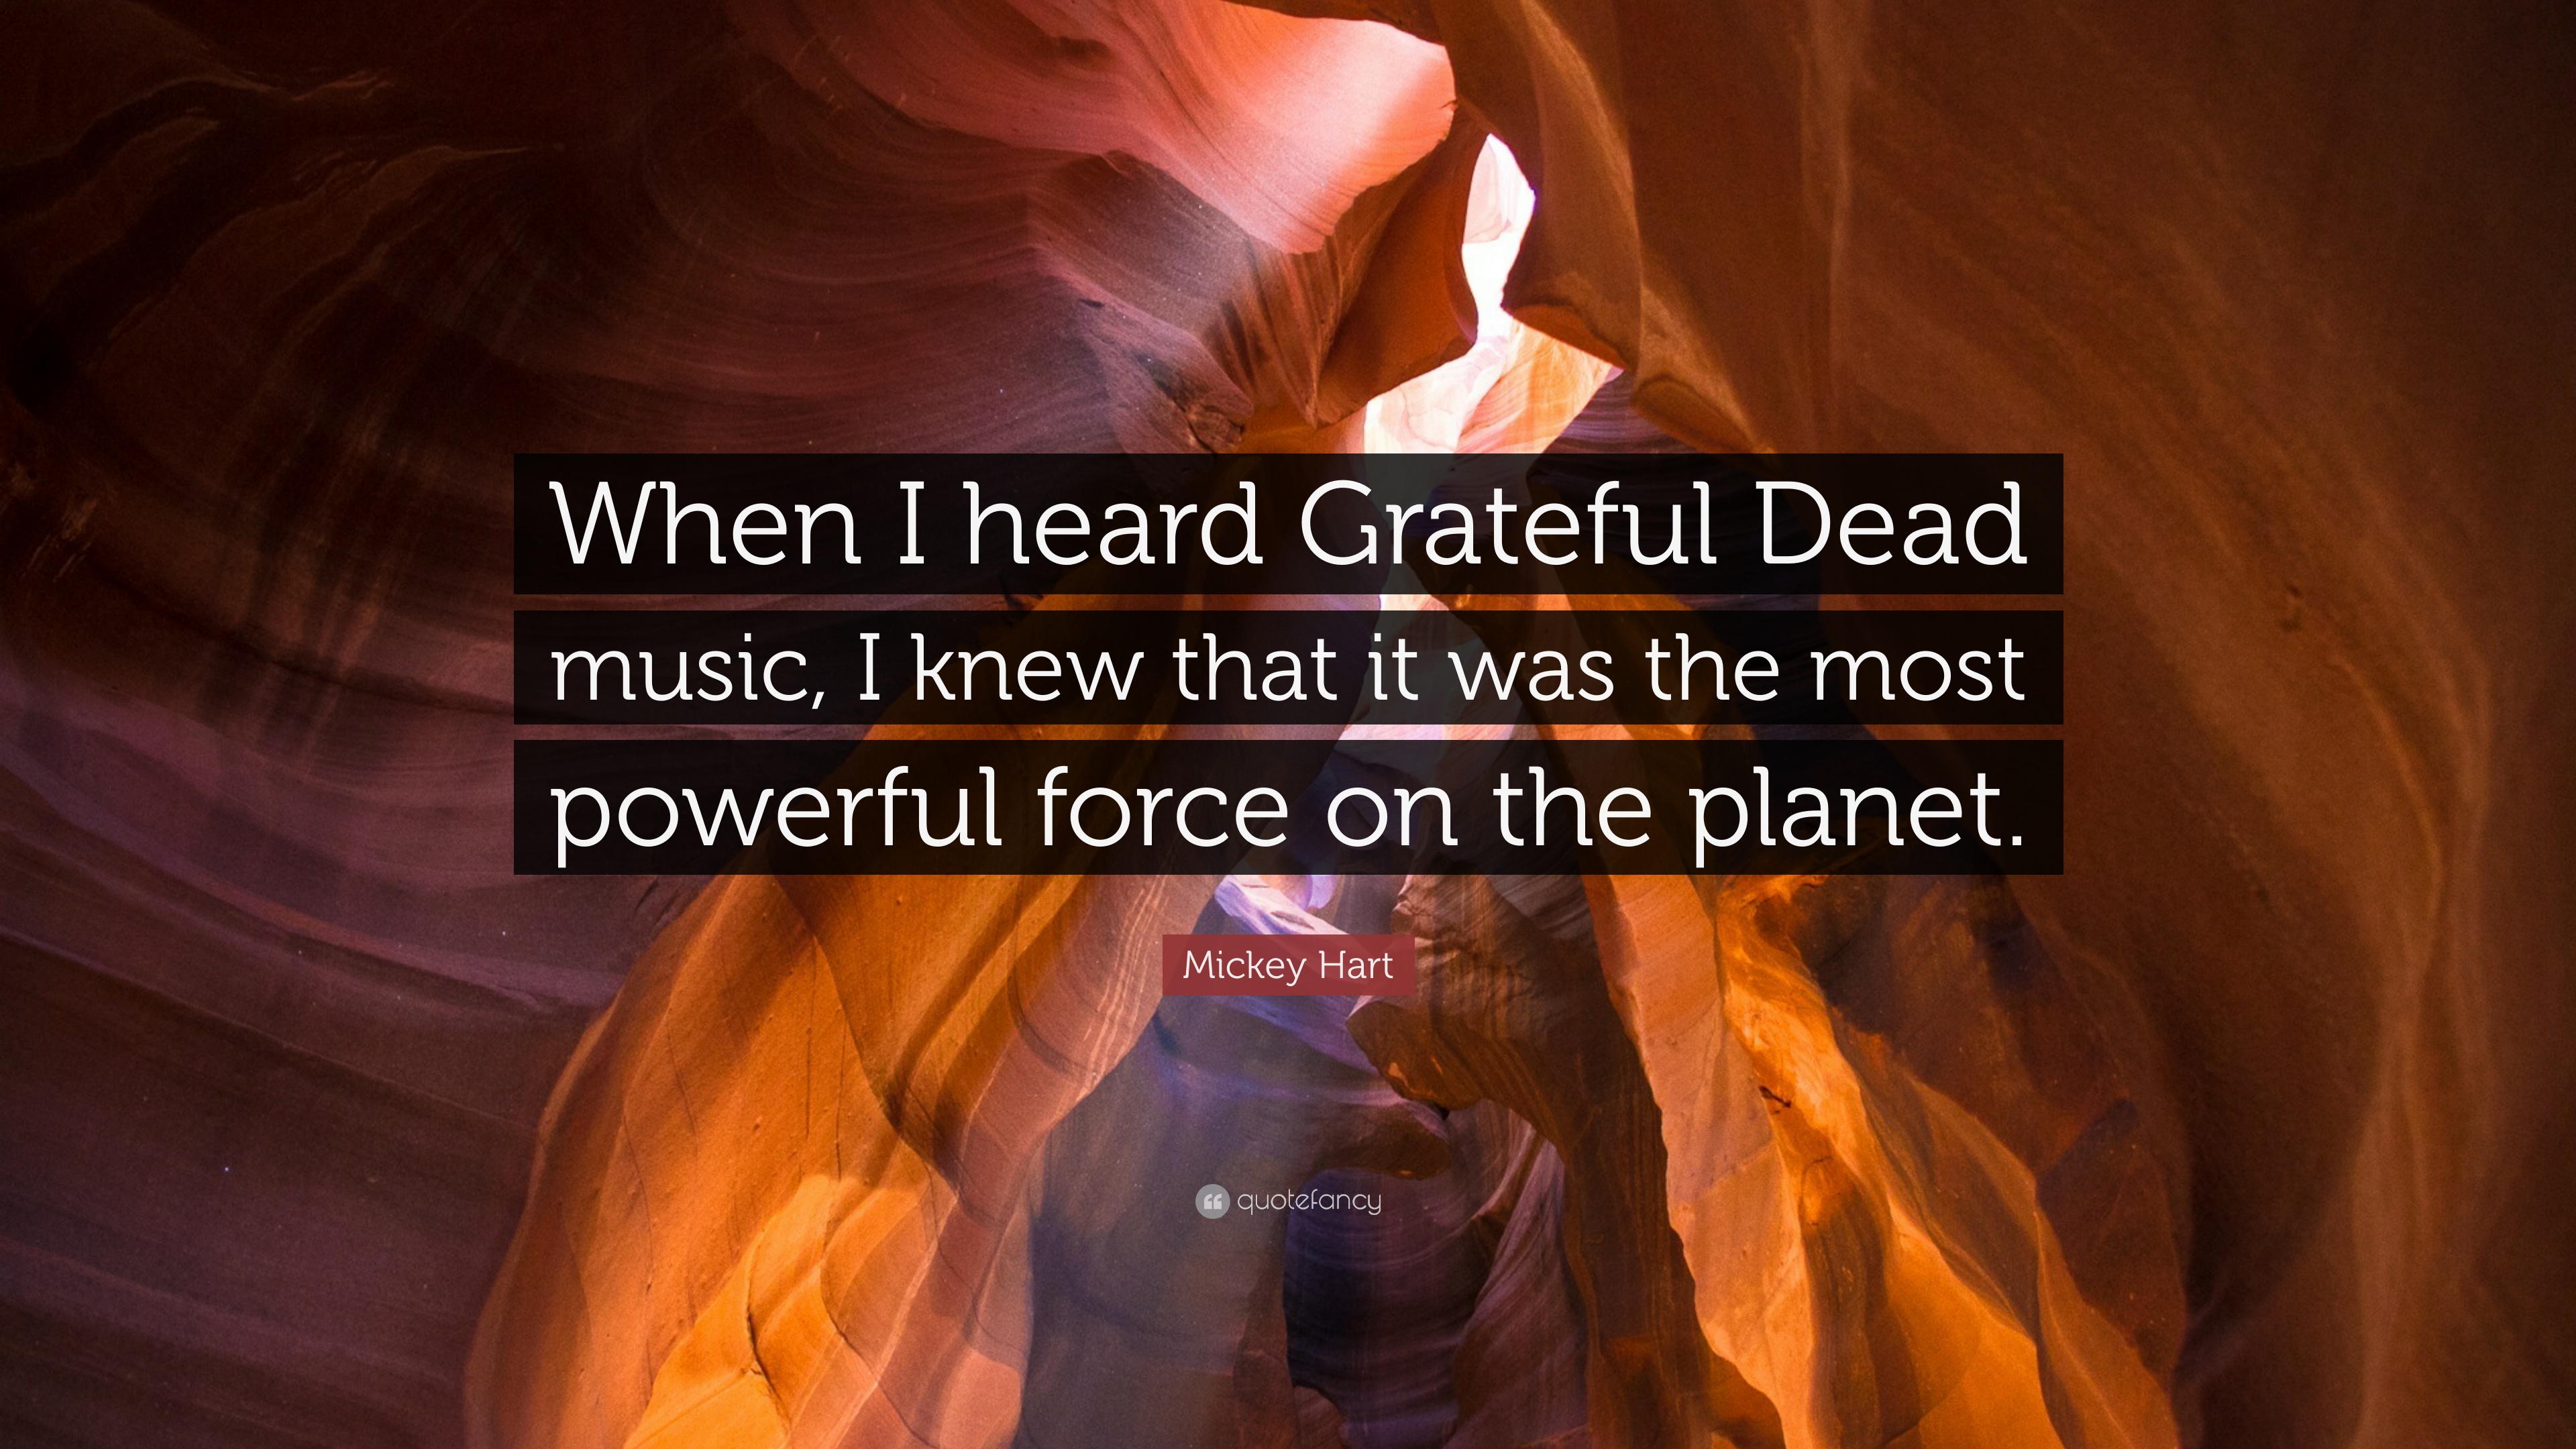 5 Mickey Hart Quotes About Grateful Dead